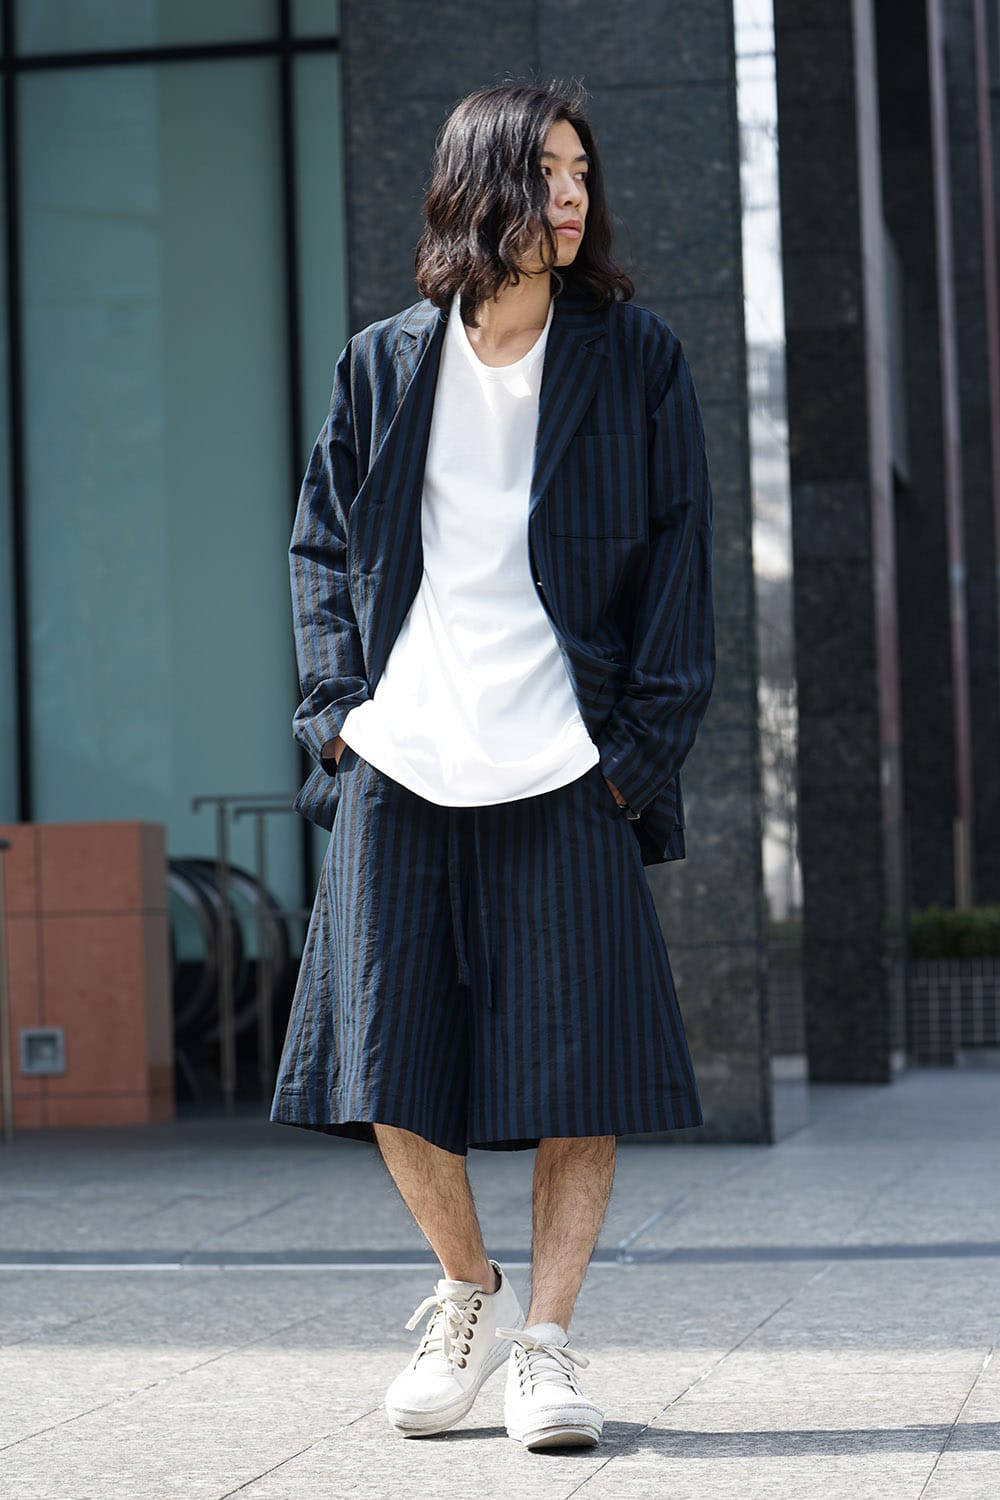 New Brand DAMIR DOMA 2018SS Collection has Arrived - FASCINATE BLOG